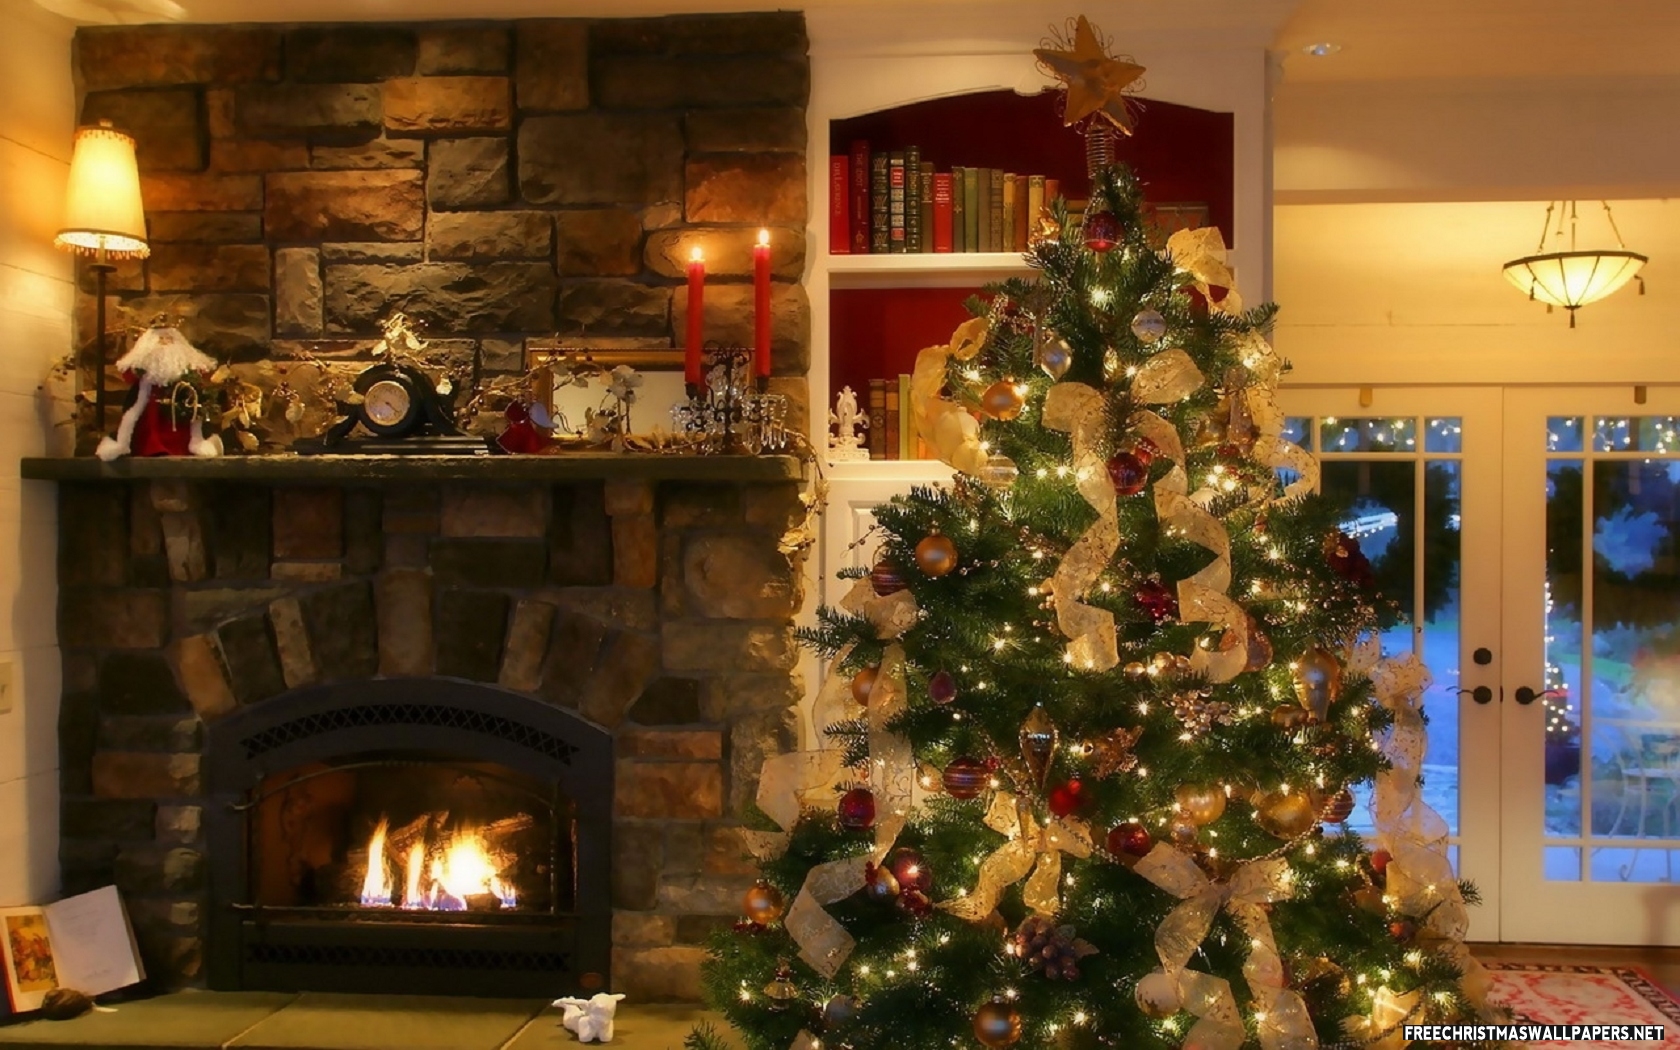 50 Widescreen Christmas Wallpapers to Have Logic of Count Down